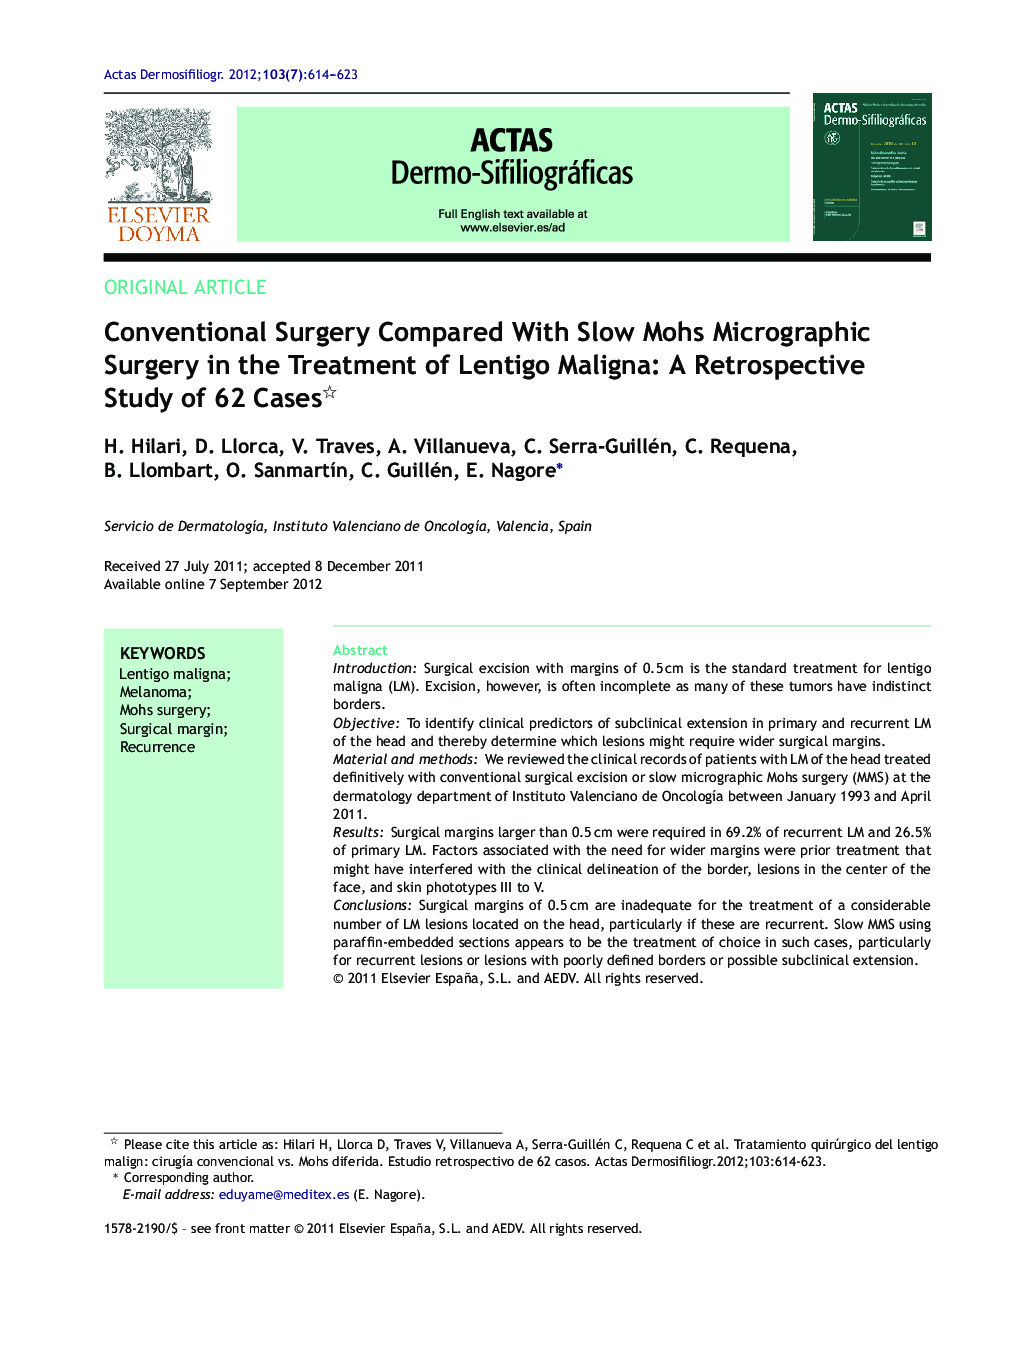 Conventional Surgery Compared With Slow Mohs Micrographic Surgery in the Treatment of Lentigo Maligna: A Retrospective Study of 62 Cases 